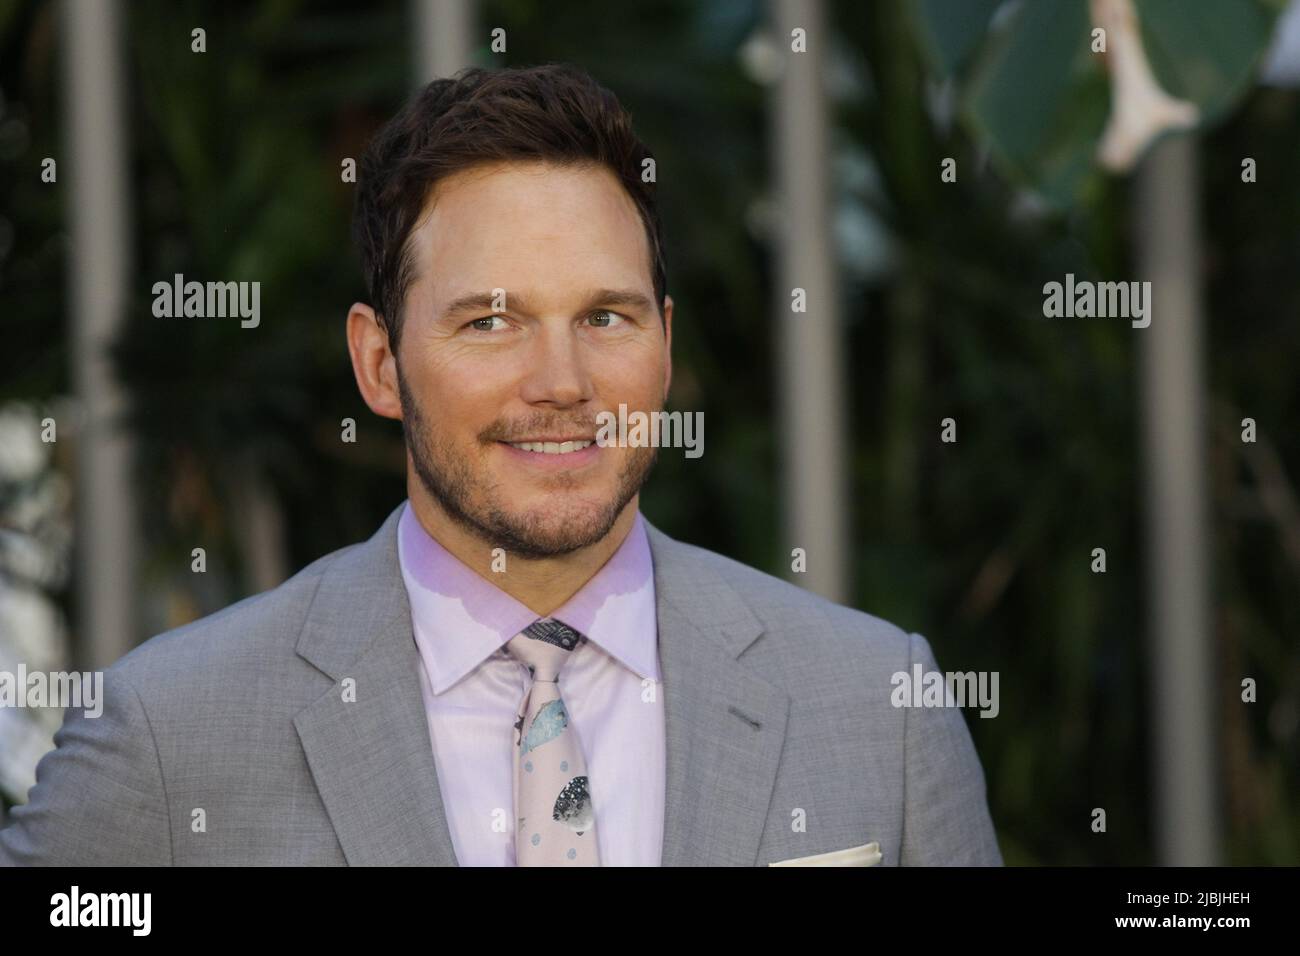 Los Angeles, USA. 07th June, 2022. Chris Pratt at "Jurassic World: Dominion" World Premiere held at the TCL Chinese Theatre, Hollywood, CA, June 6, 2022. Photo Credit: Joseph Martinez/PictureLux Credit: PictureLux/The Hollywood Archive/Alamy Live News Stock Photo